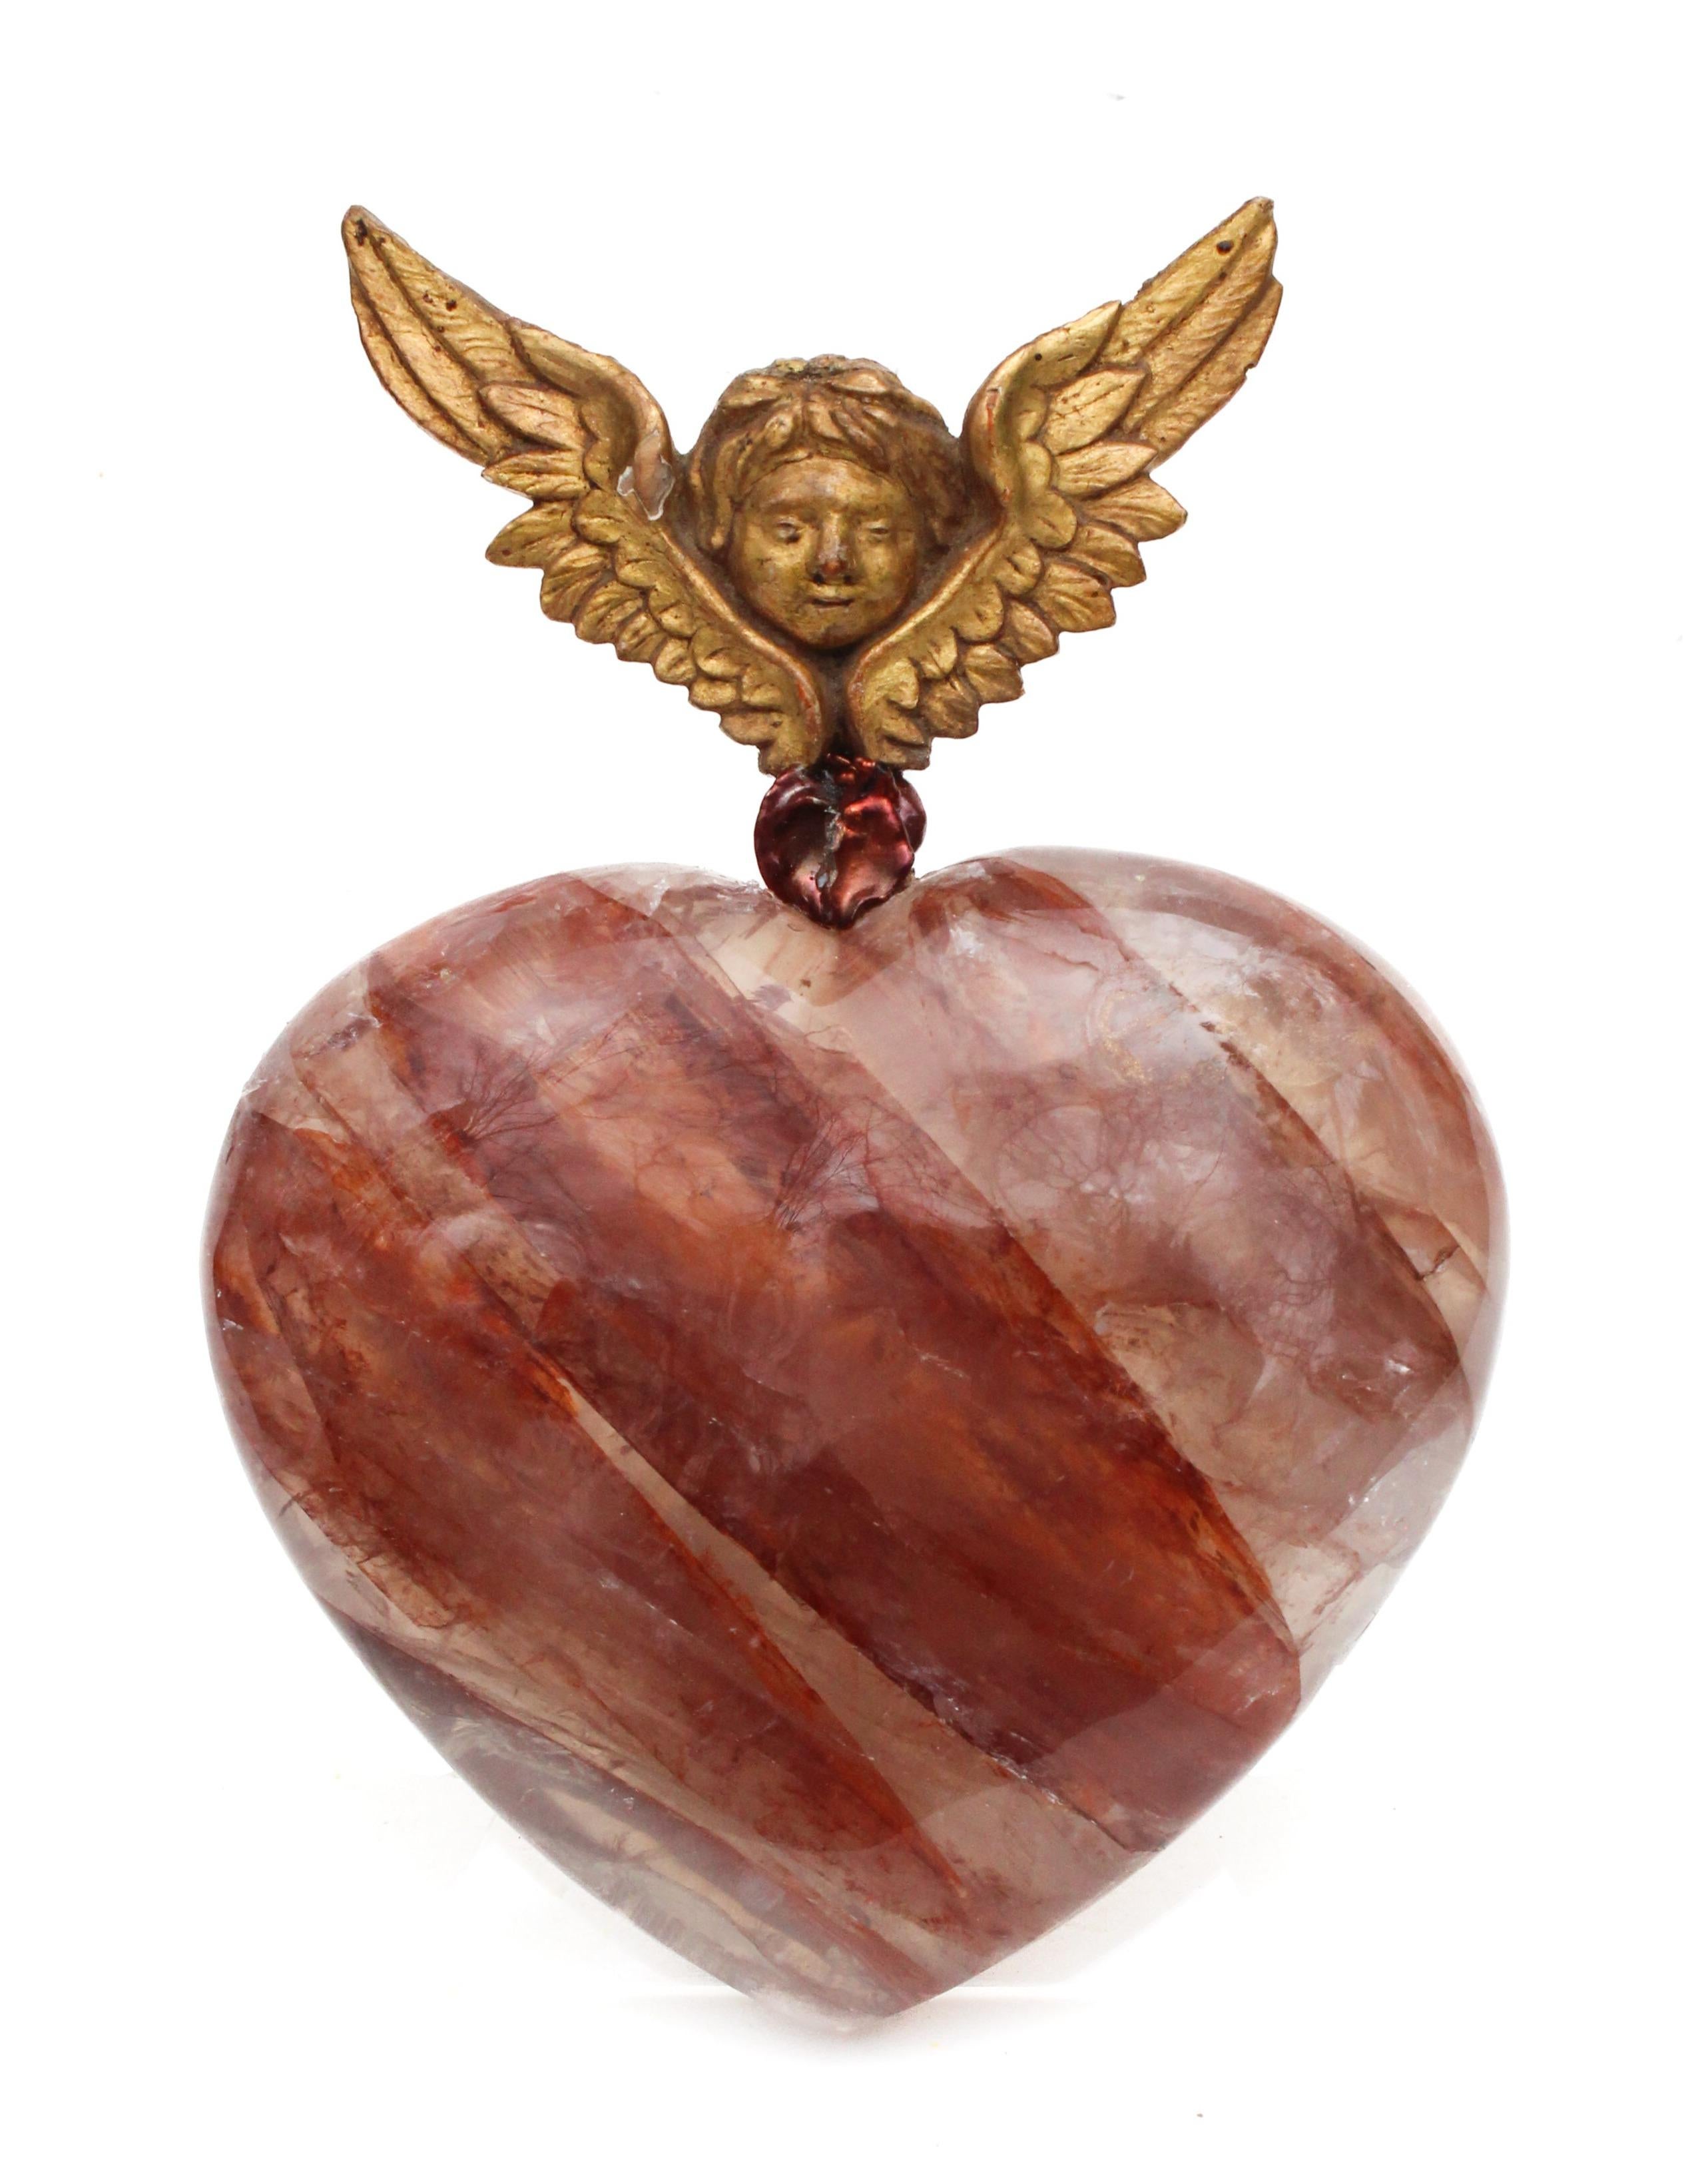 Sculptural 'Sacred Heart' - 18th century Italian gilded angel mounted on a polished red hematoid quartz heart and adorned with a natural-forming baroque pearl.The piece is inspired by 